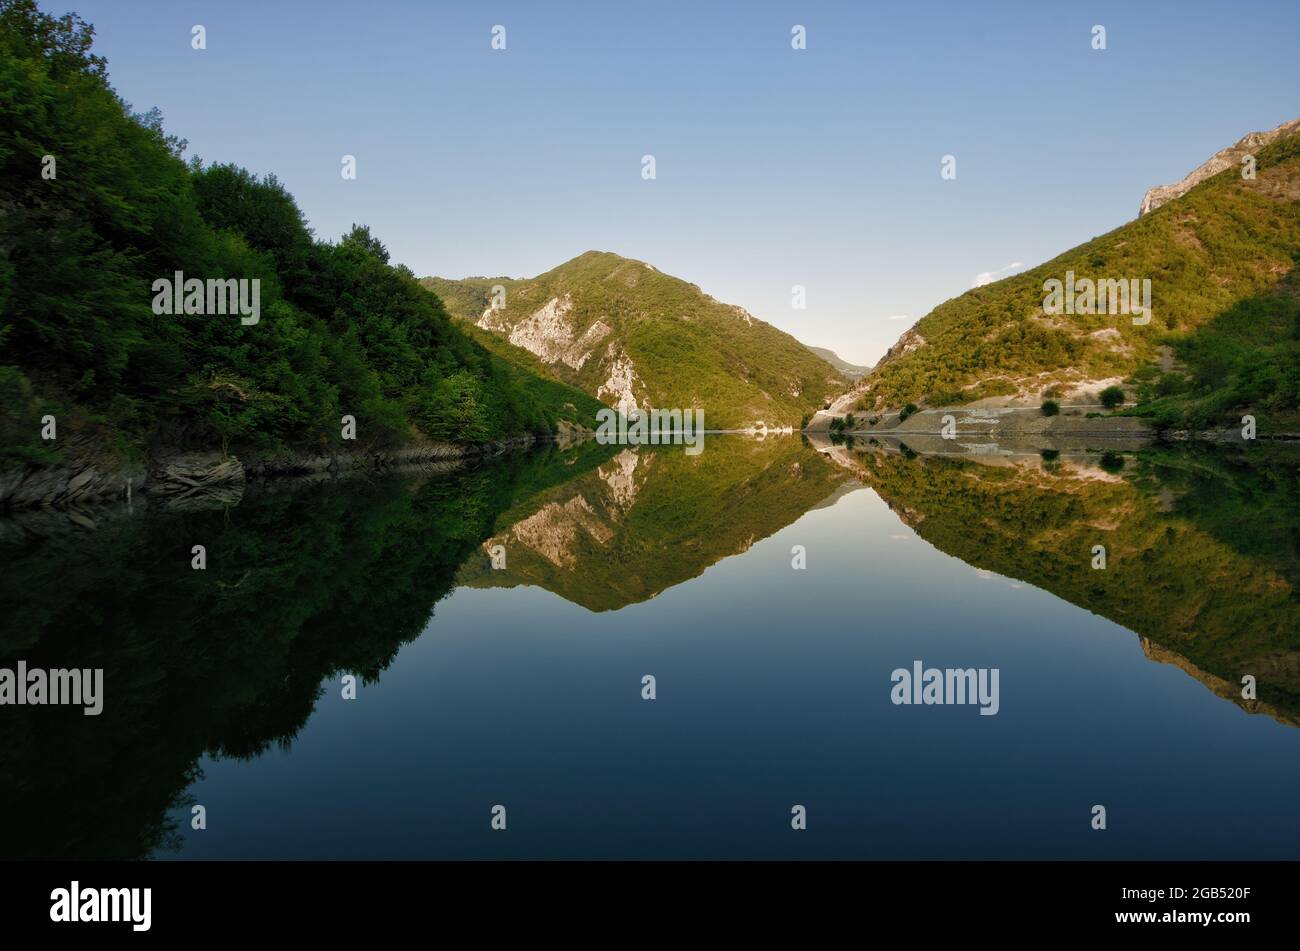 mountain landscape in Albania its clear reflection on the waters of Lake Koman in the morning Stock Photo